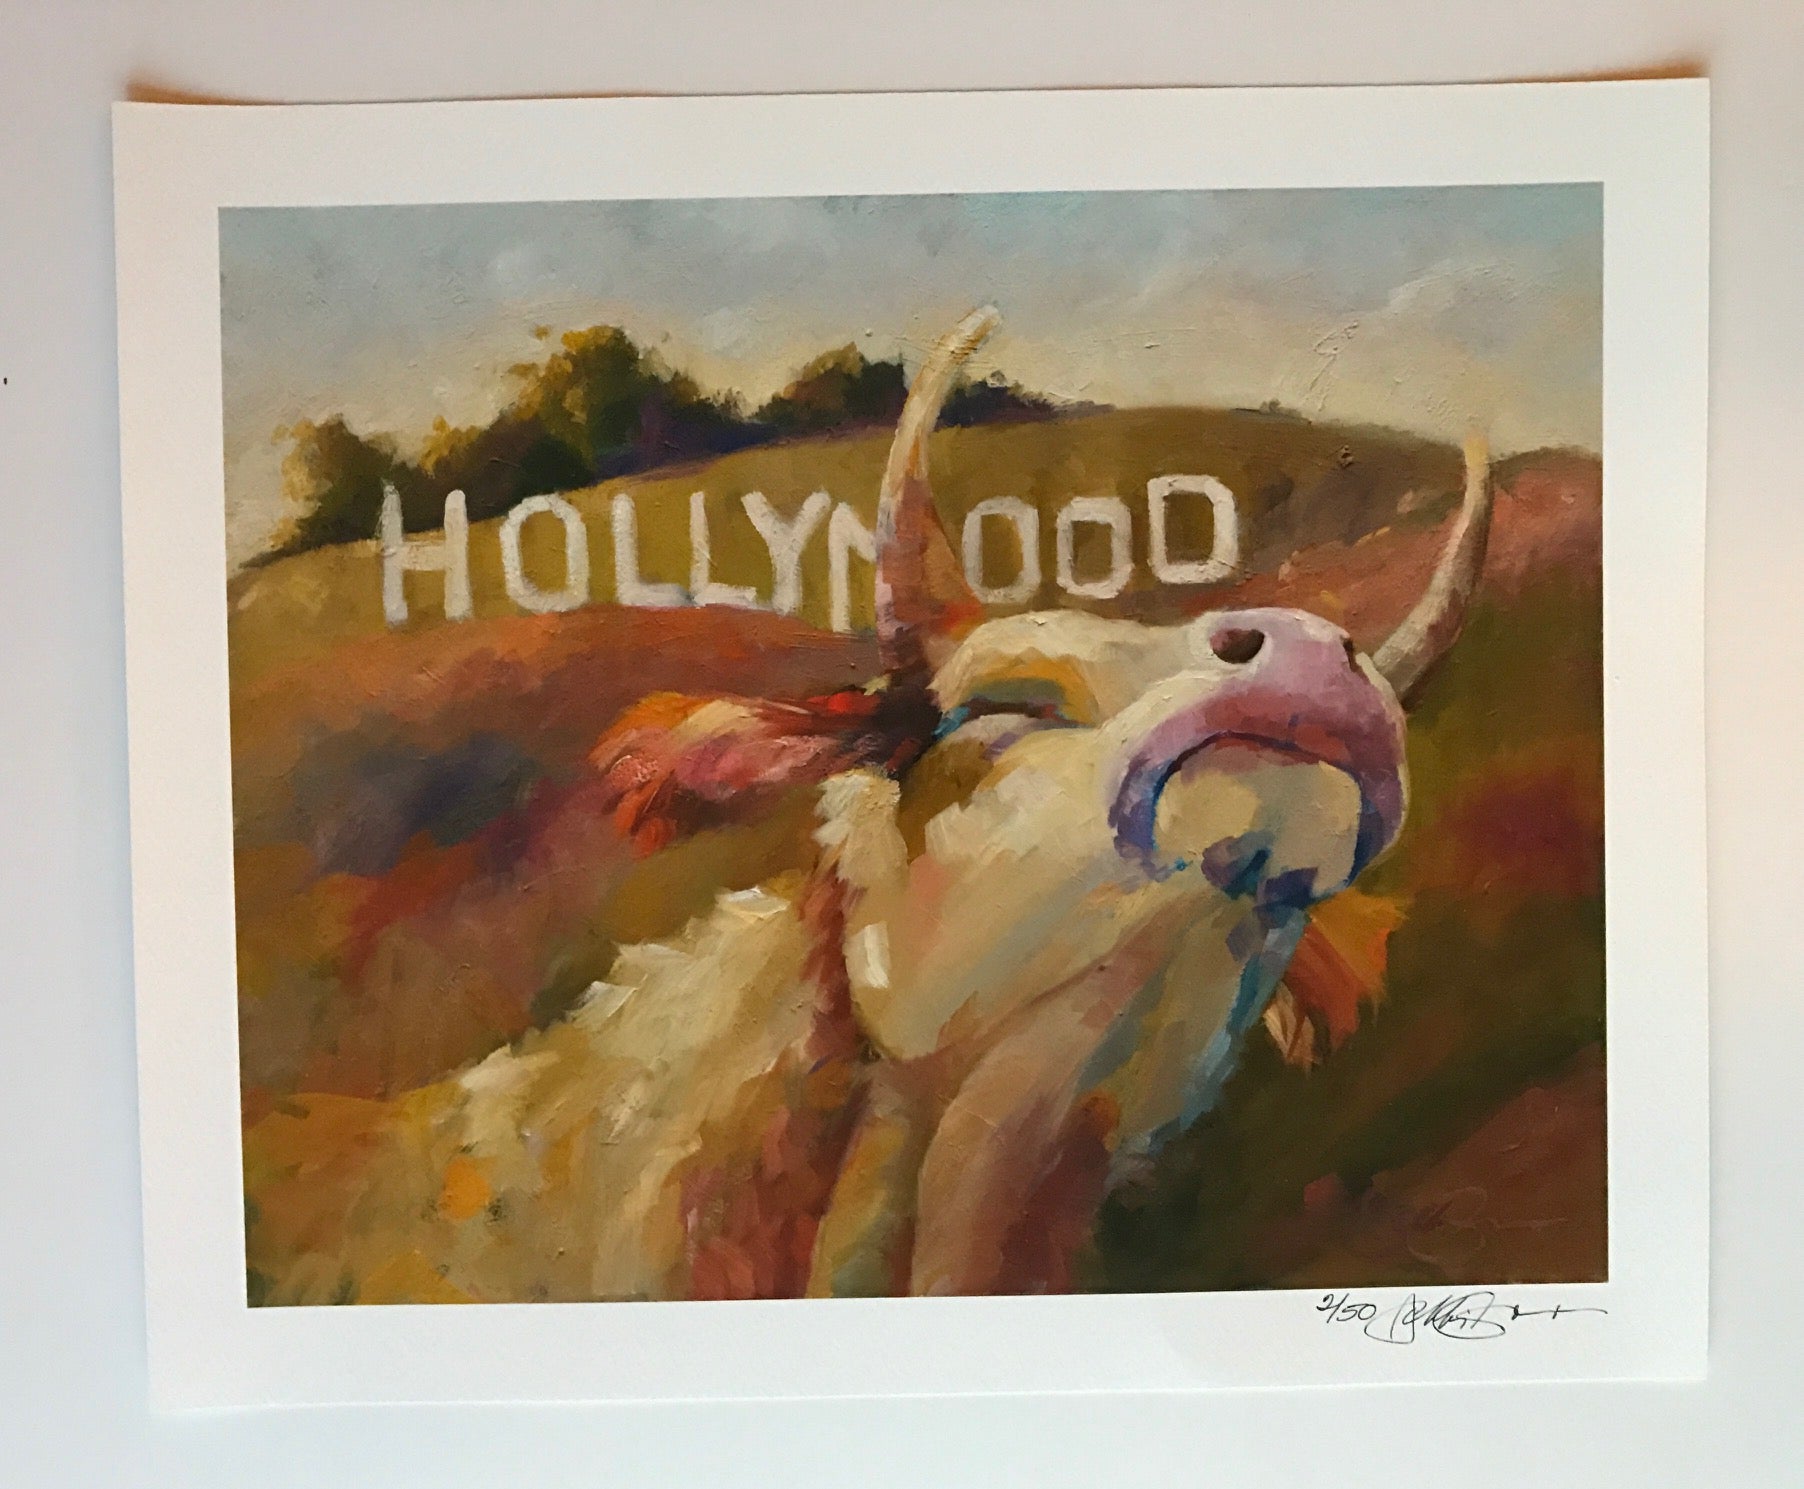 "Hollymood", 11 x 14 inches